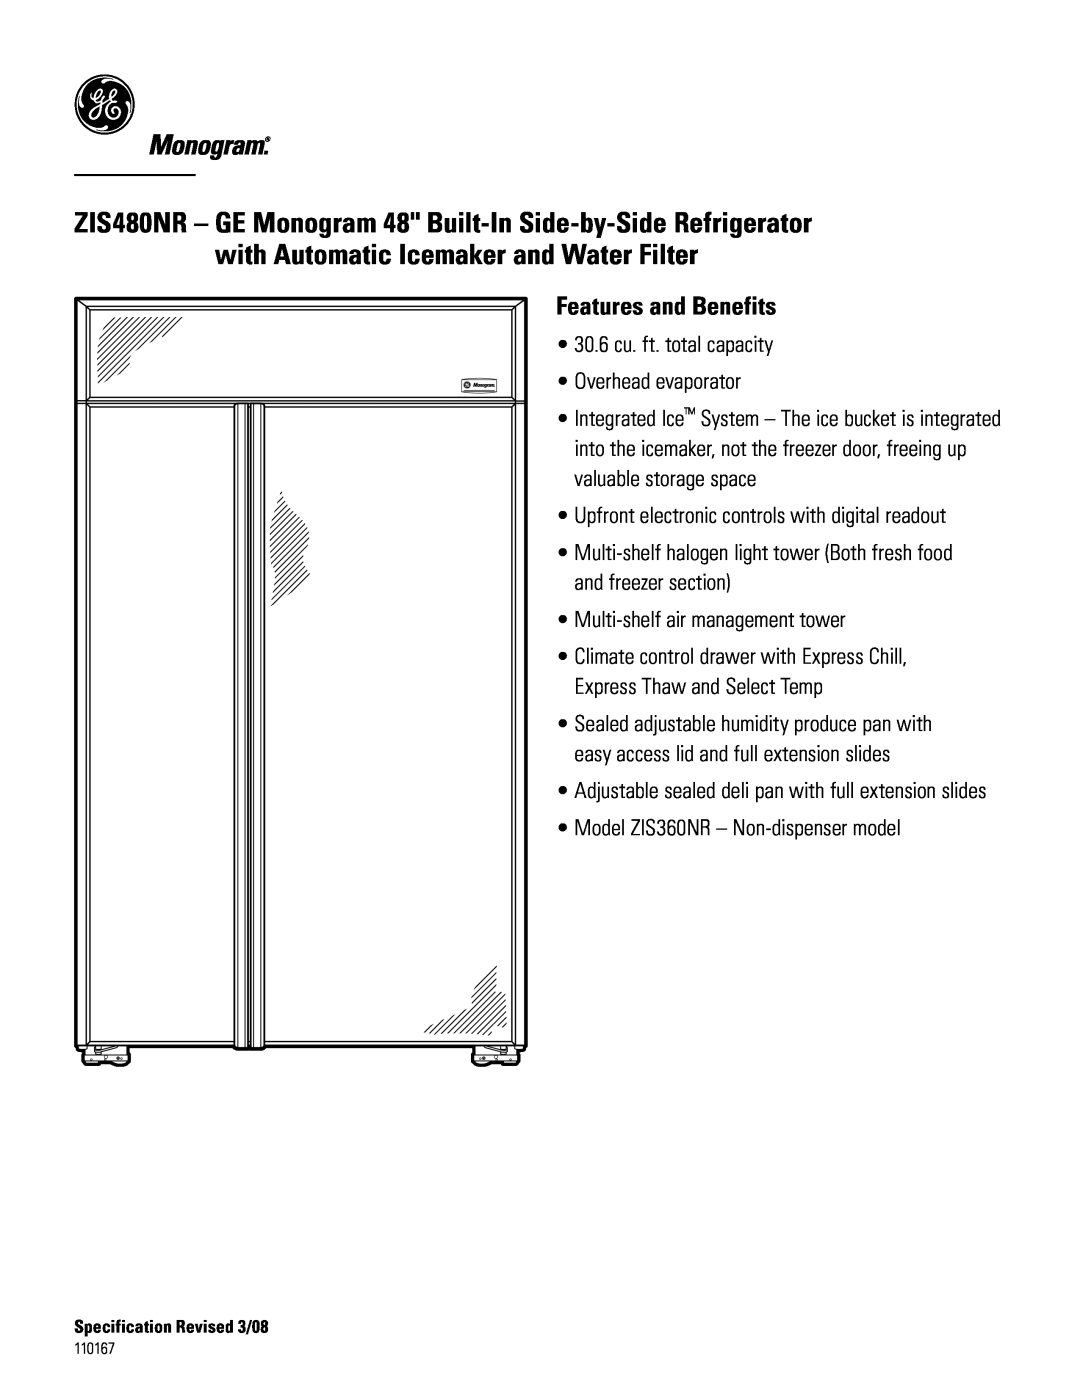 GE Monogram ZIS480NR installation instructions Features and Benefits 